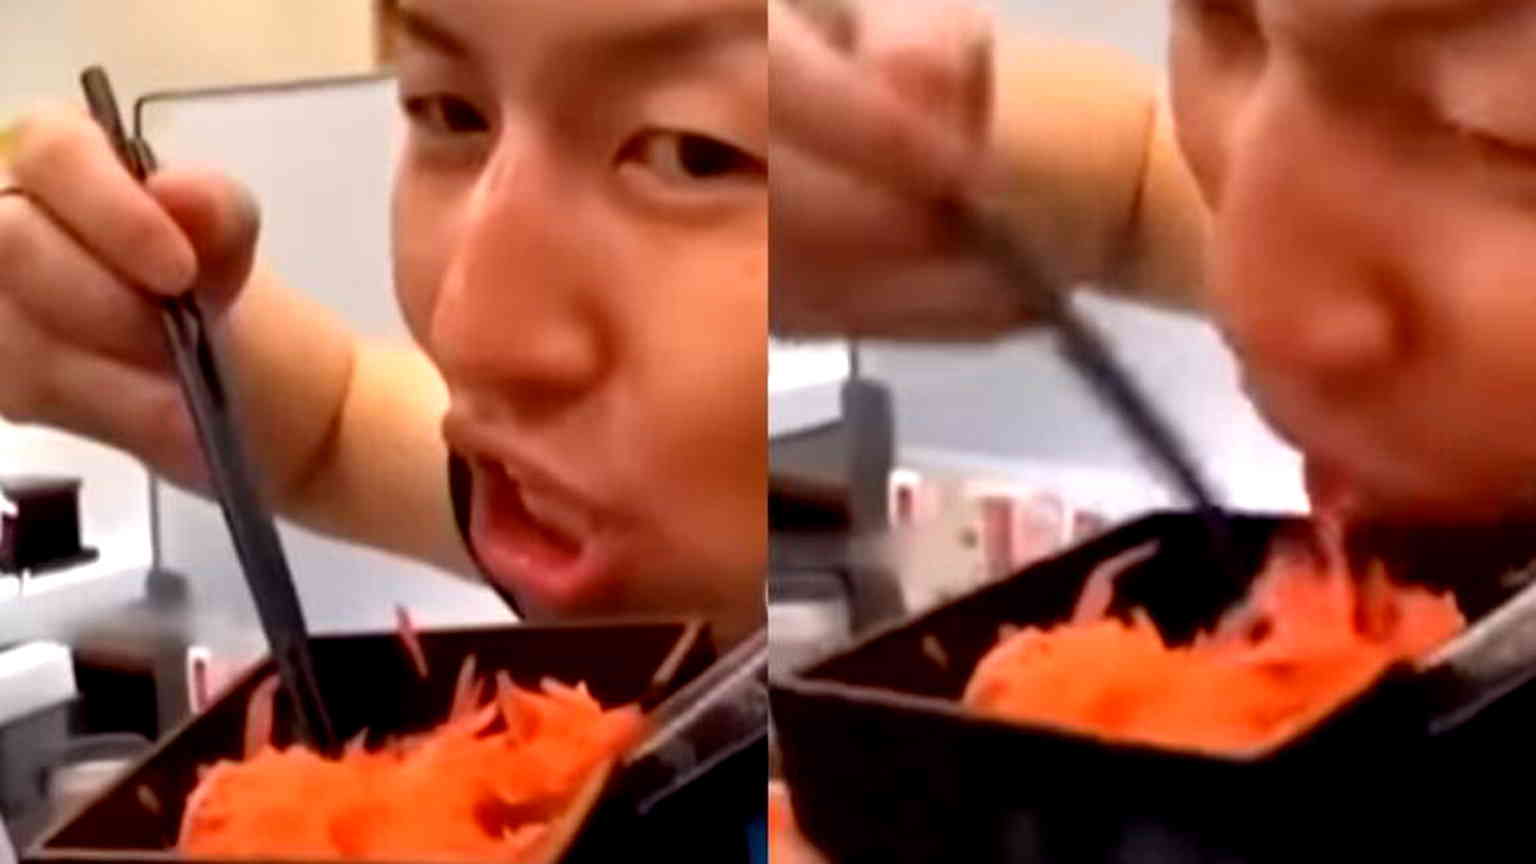 2 diners in Japan arrested for dipping their chopsticks into restaurant’s communal container